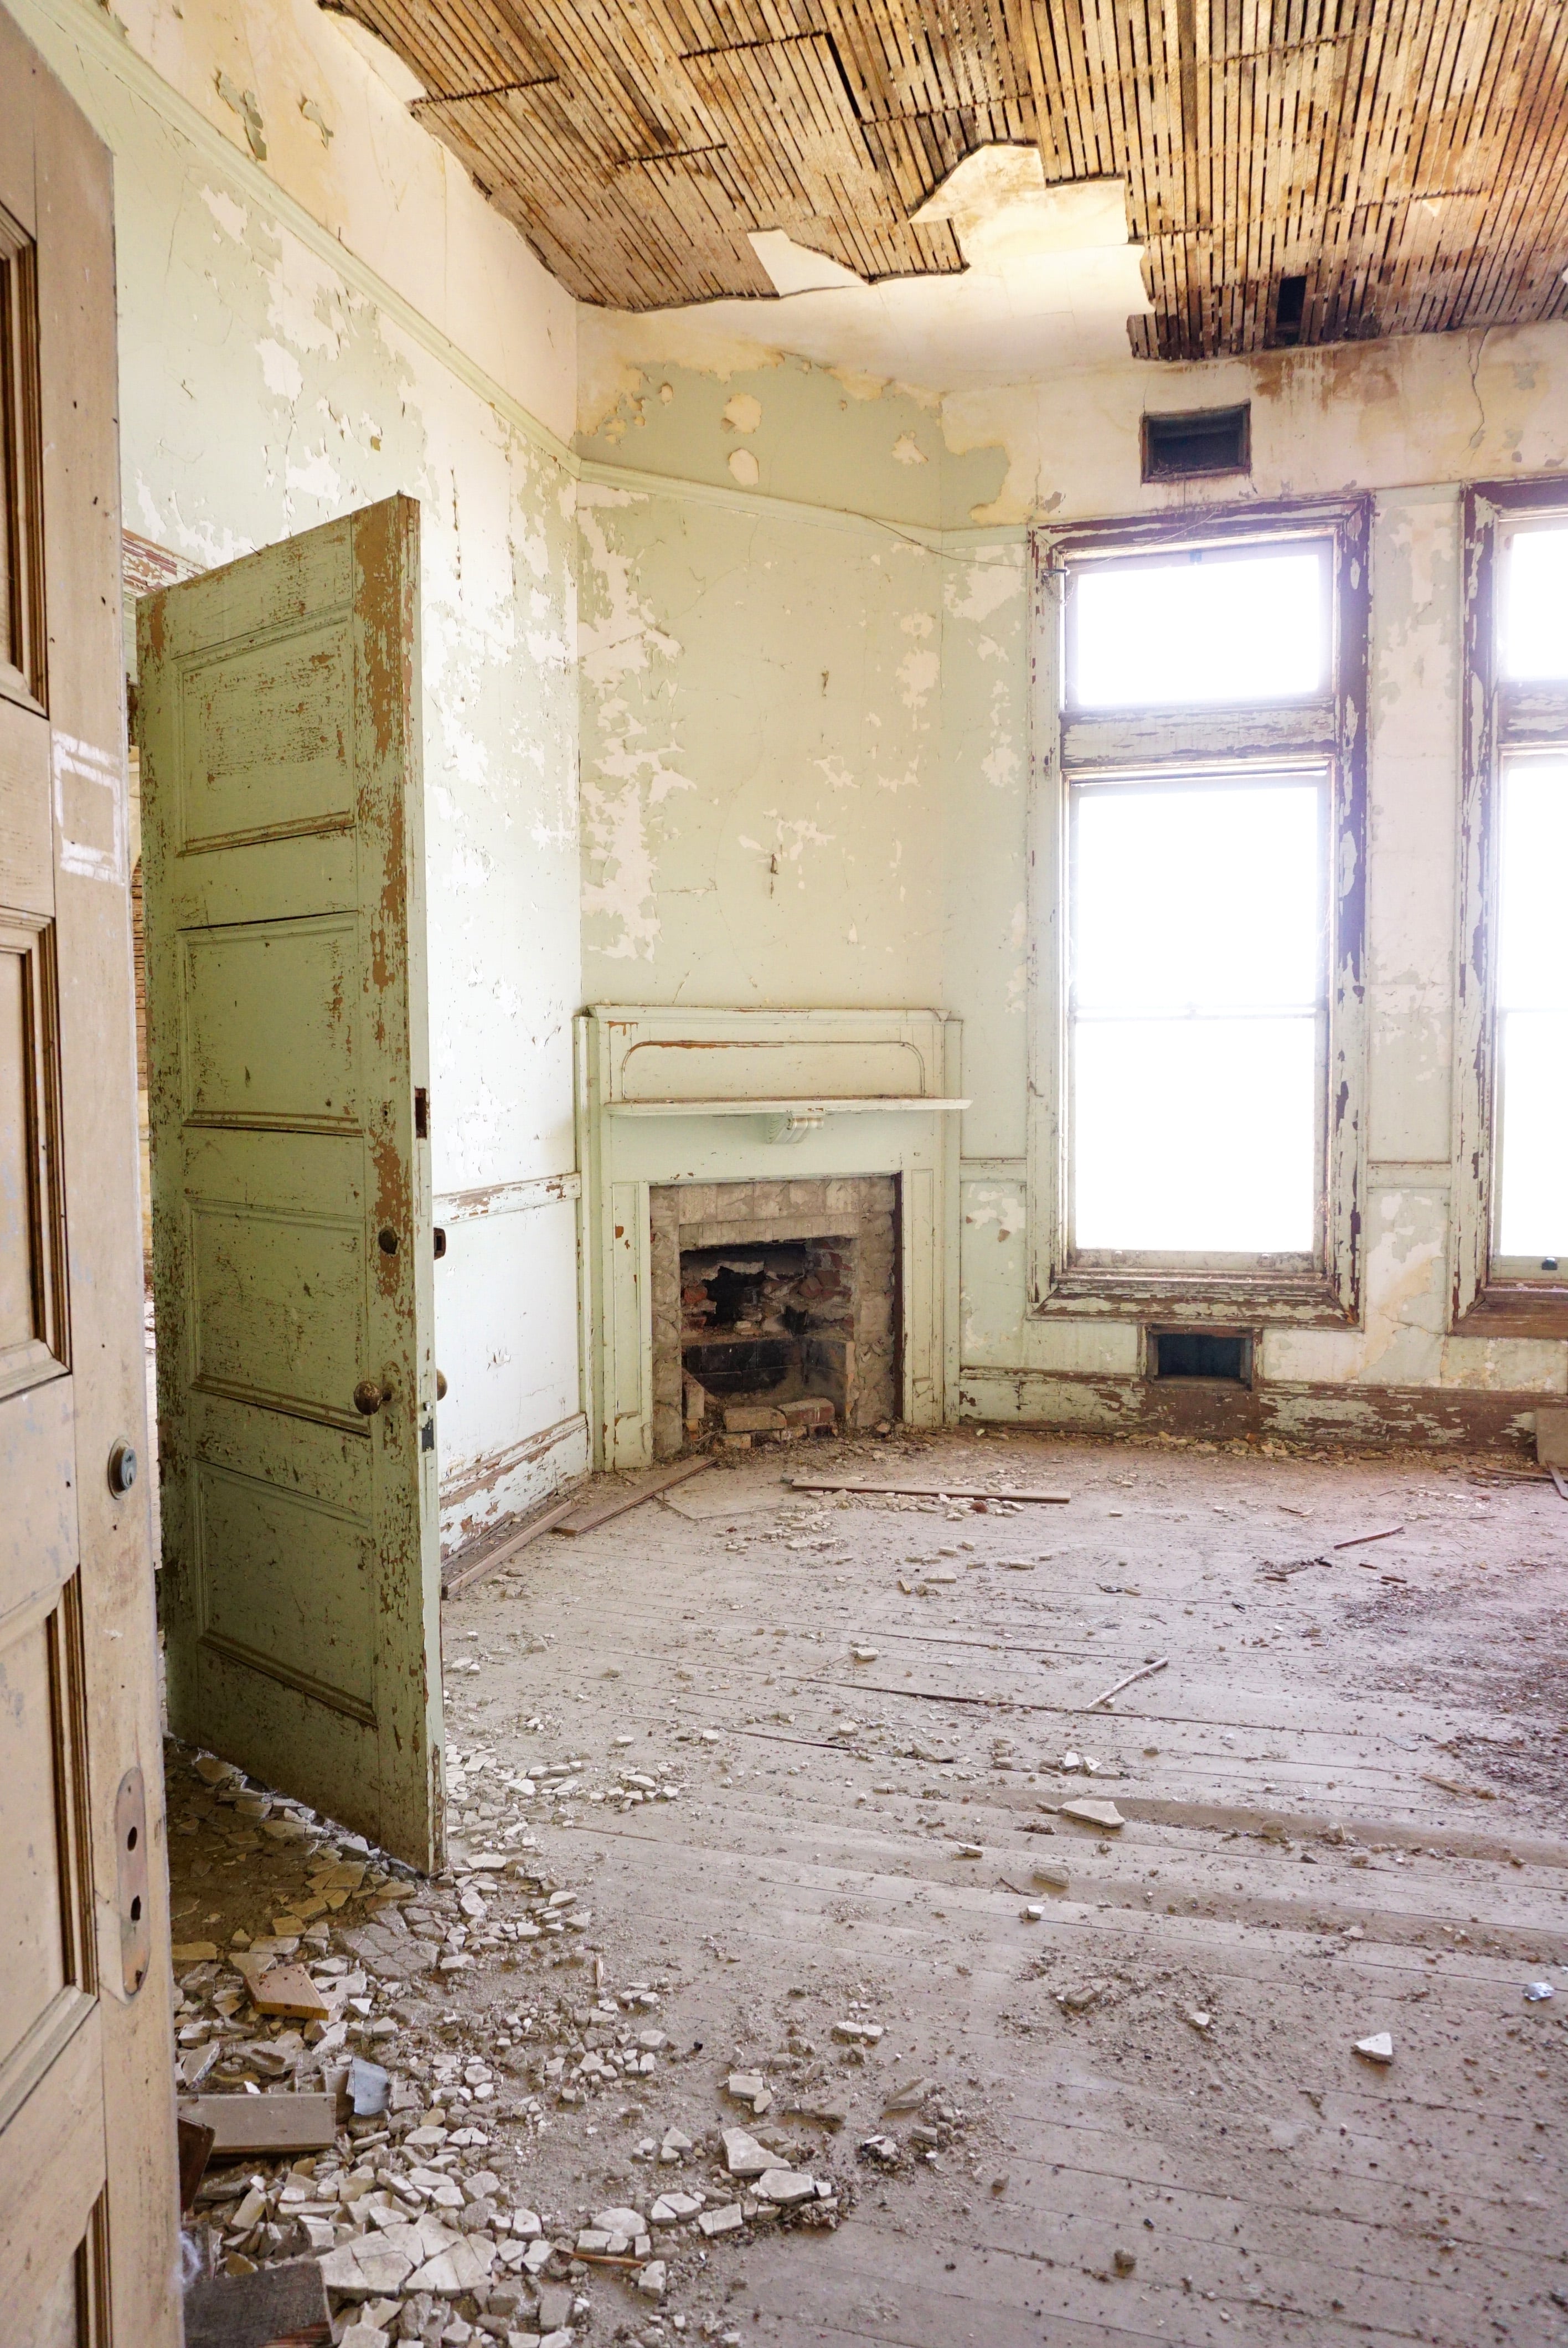 Room with mint green door and fireplace in ruins